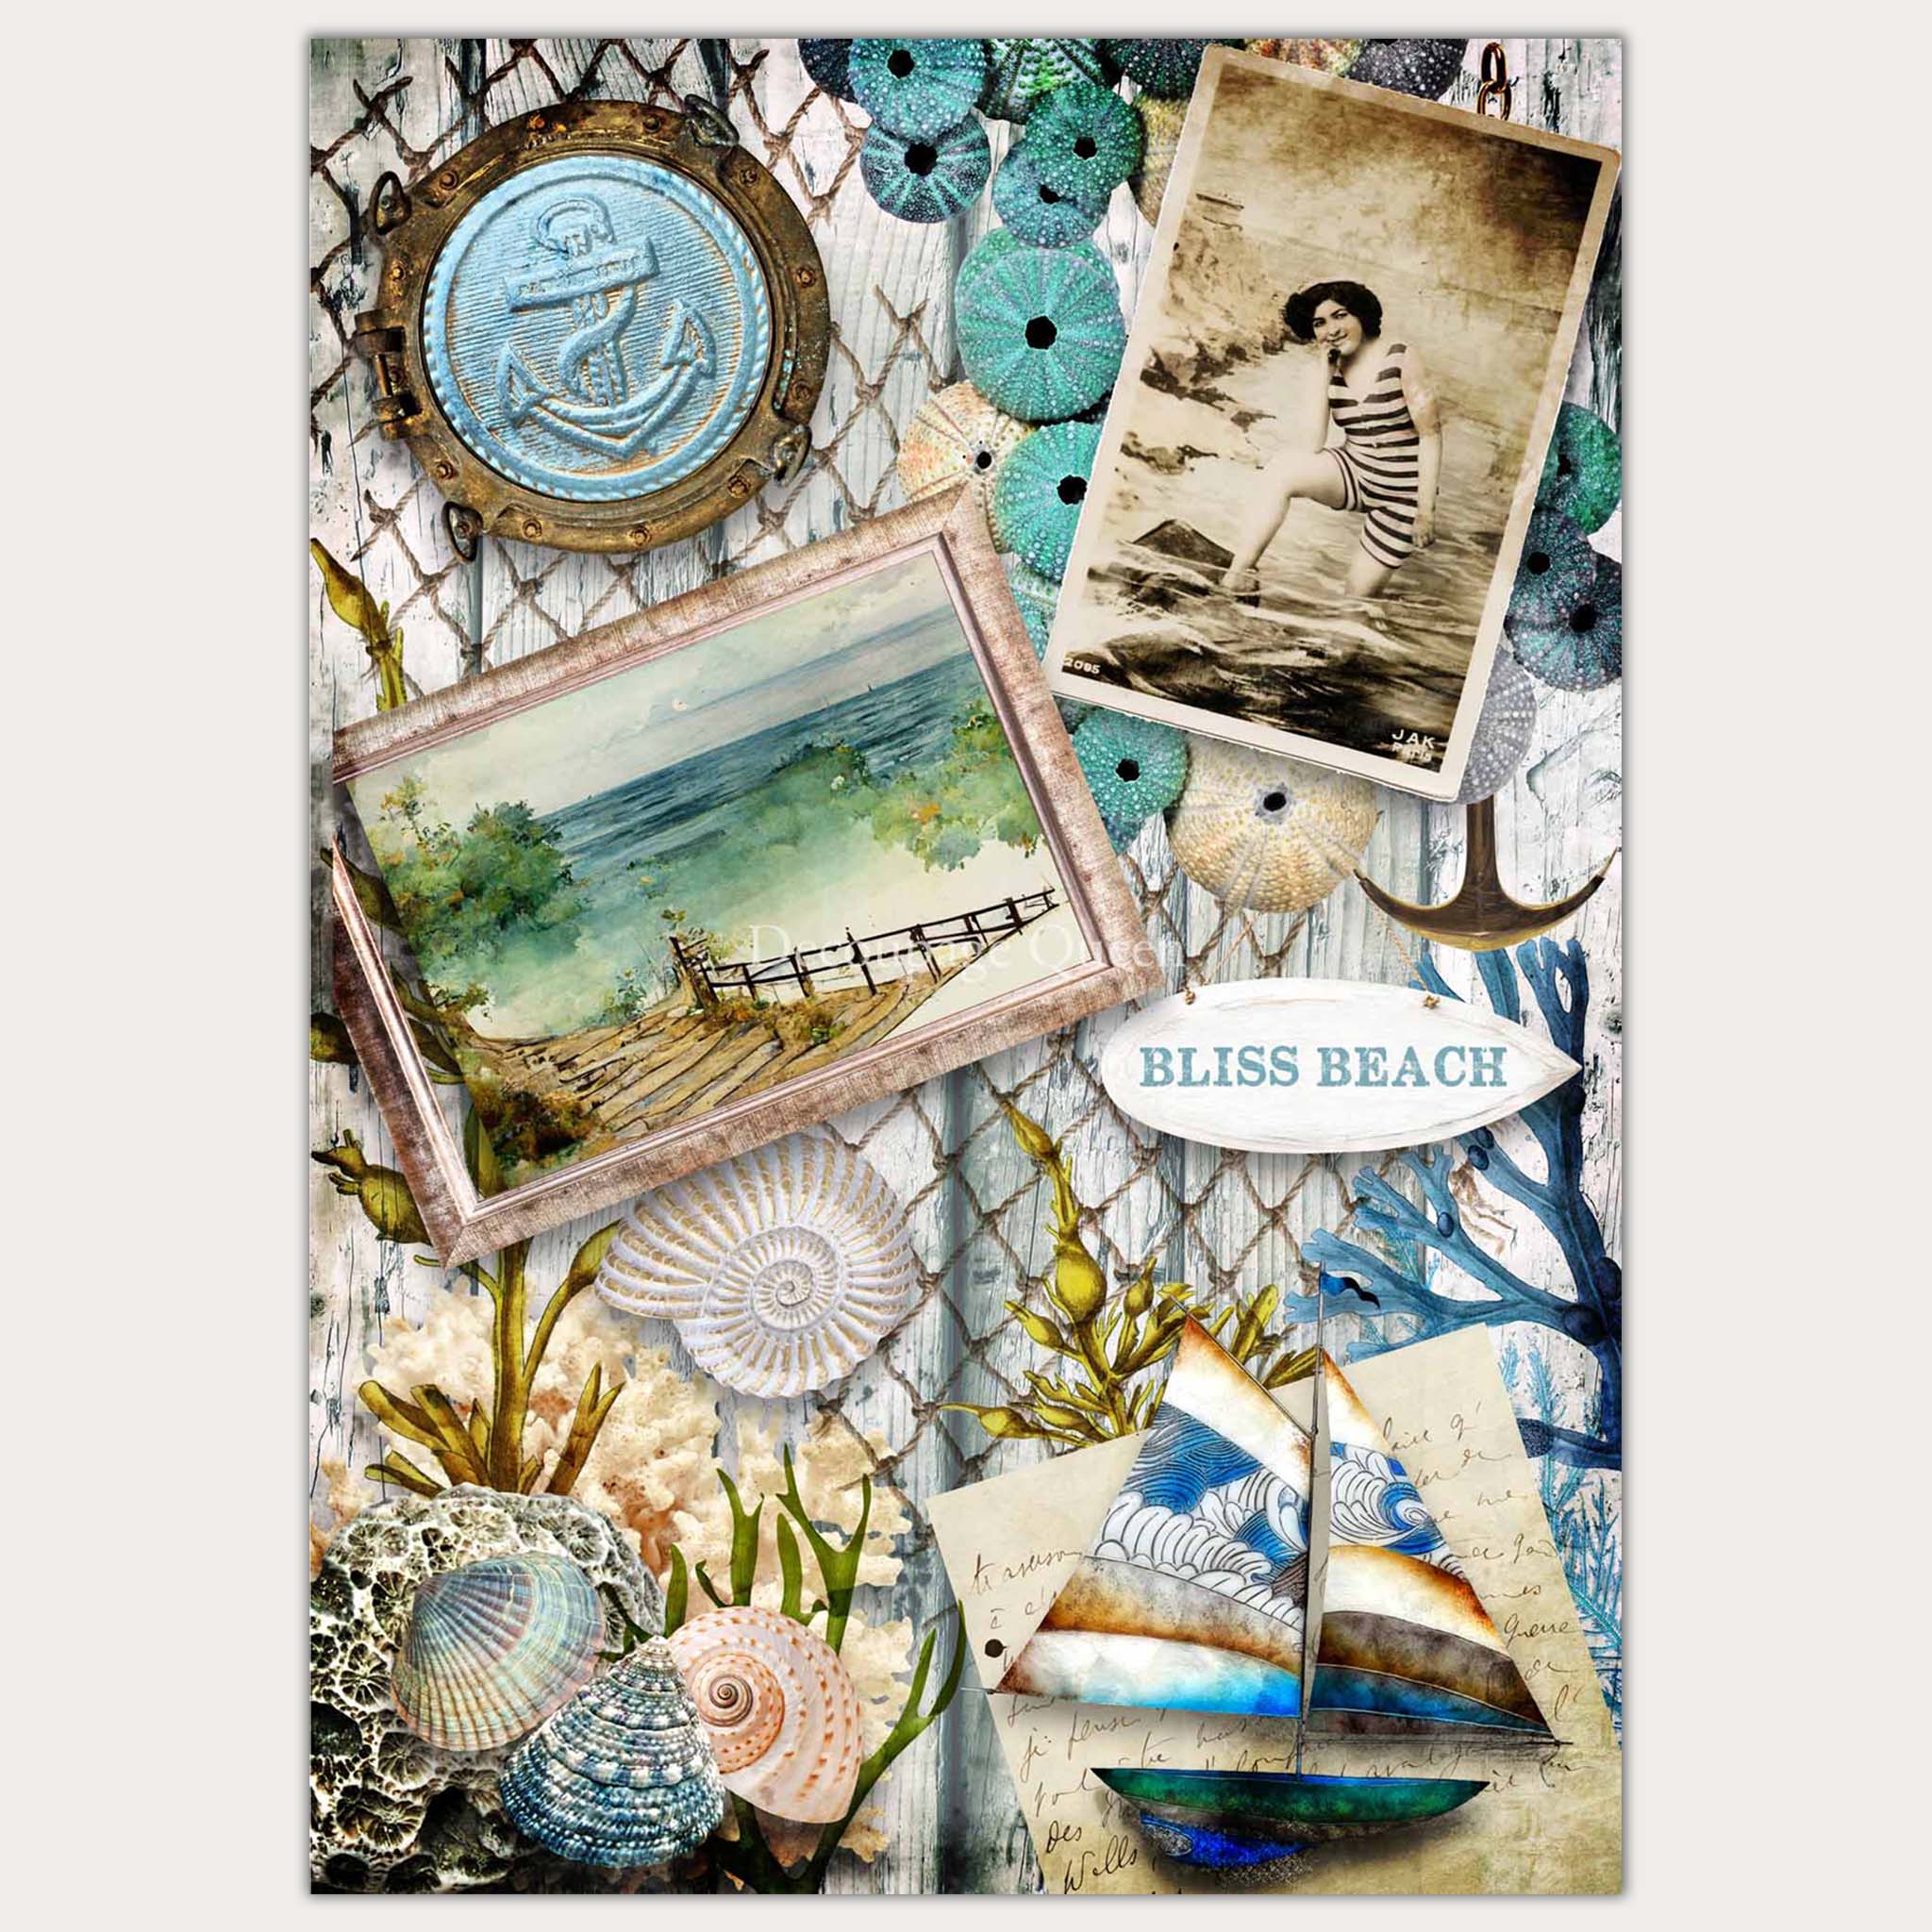 A3 rice paper design that features a collage of beach items and photos against a wood and netting background. White borders surround the paper.